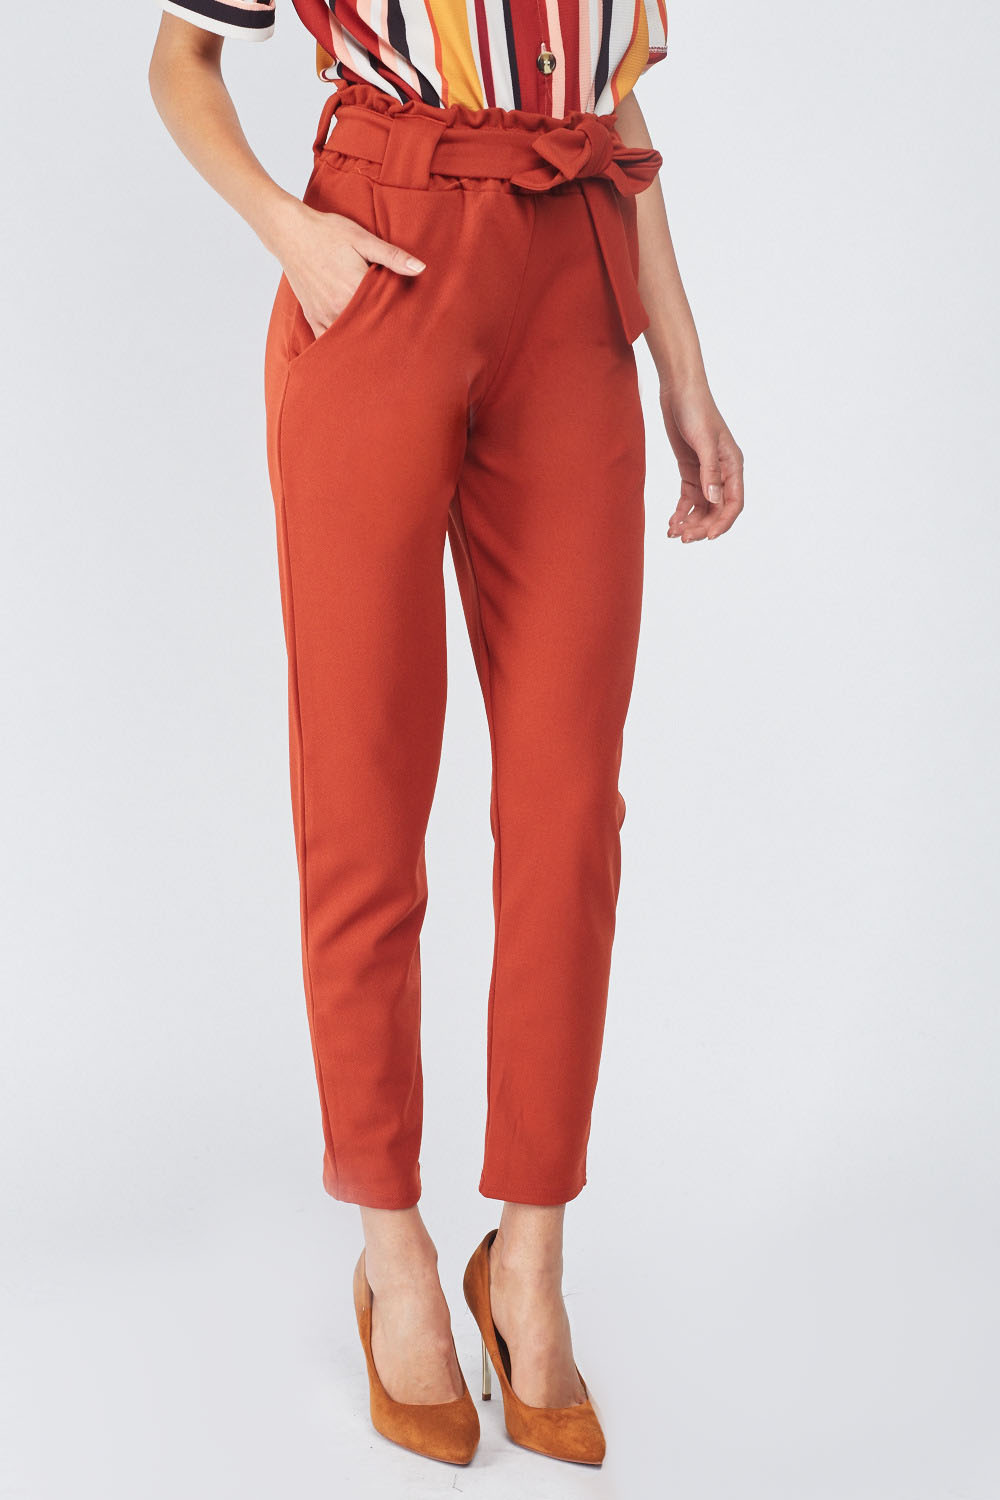 Belted Tapered Rust Trousers - Just $6